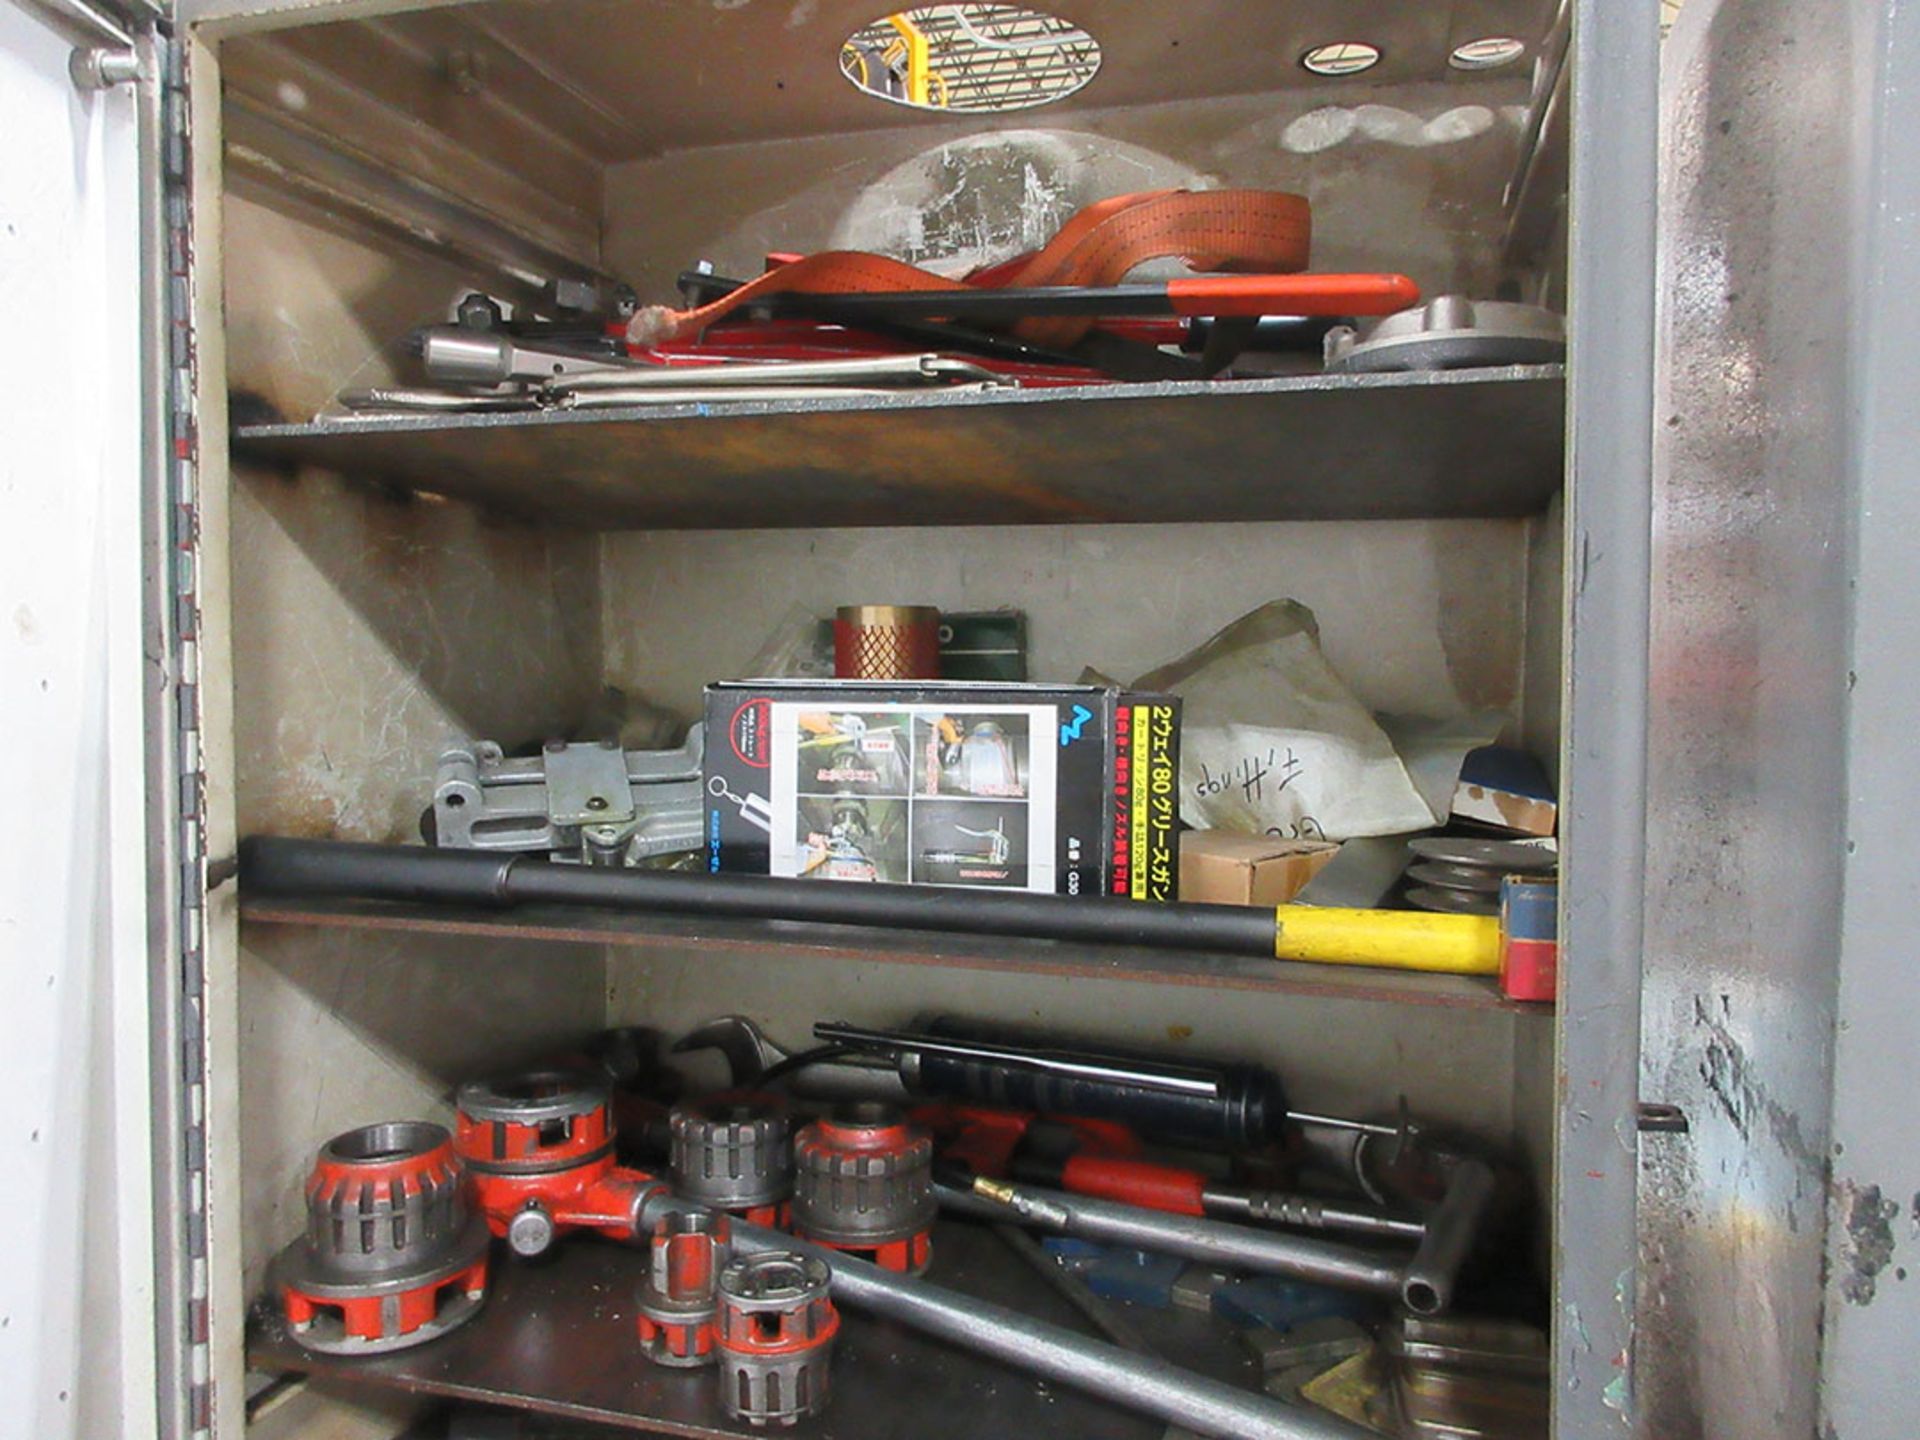 CABINET WITH PLUMBING TOOLS; PIPE WRENCHES, THREAD DIES, ALSO ALONG WALL PIPE BENDERS - Image 2 of 4